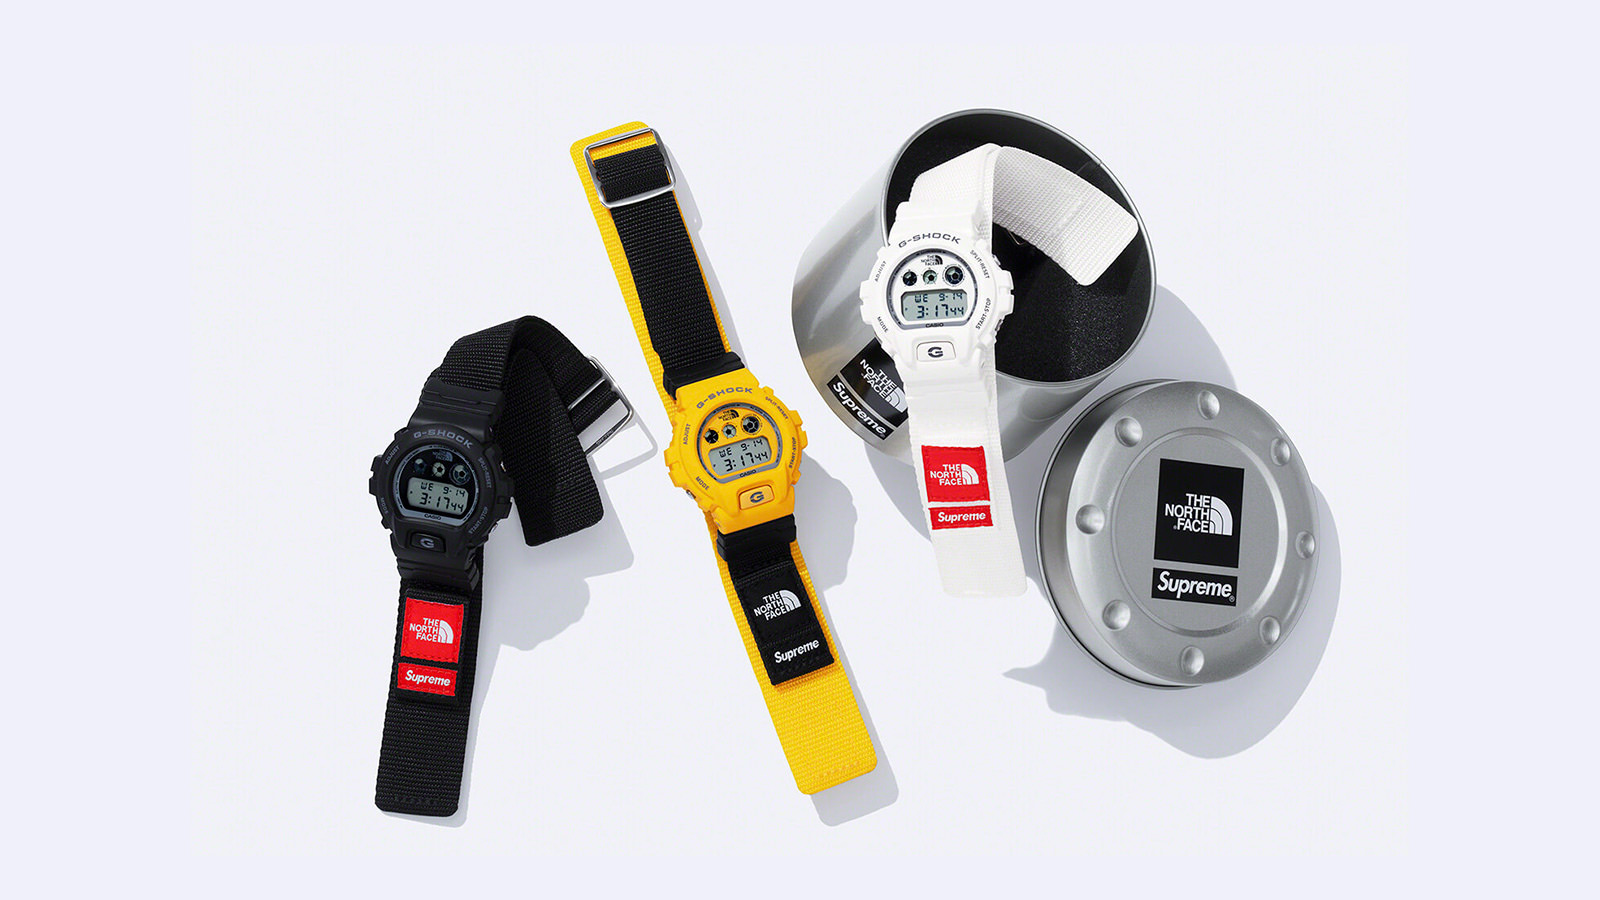 The Supreme x The North Face x G-Shock DW-6900